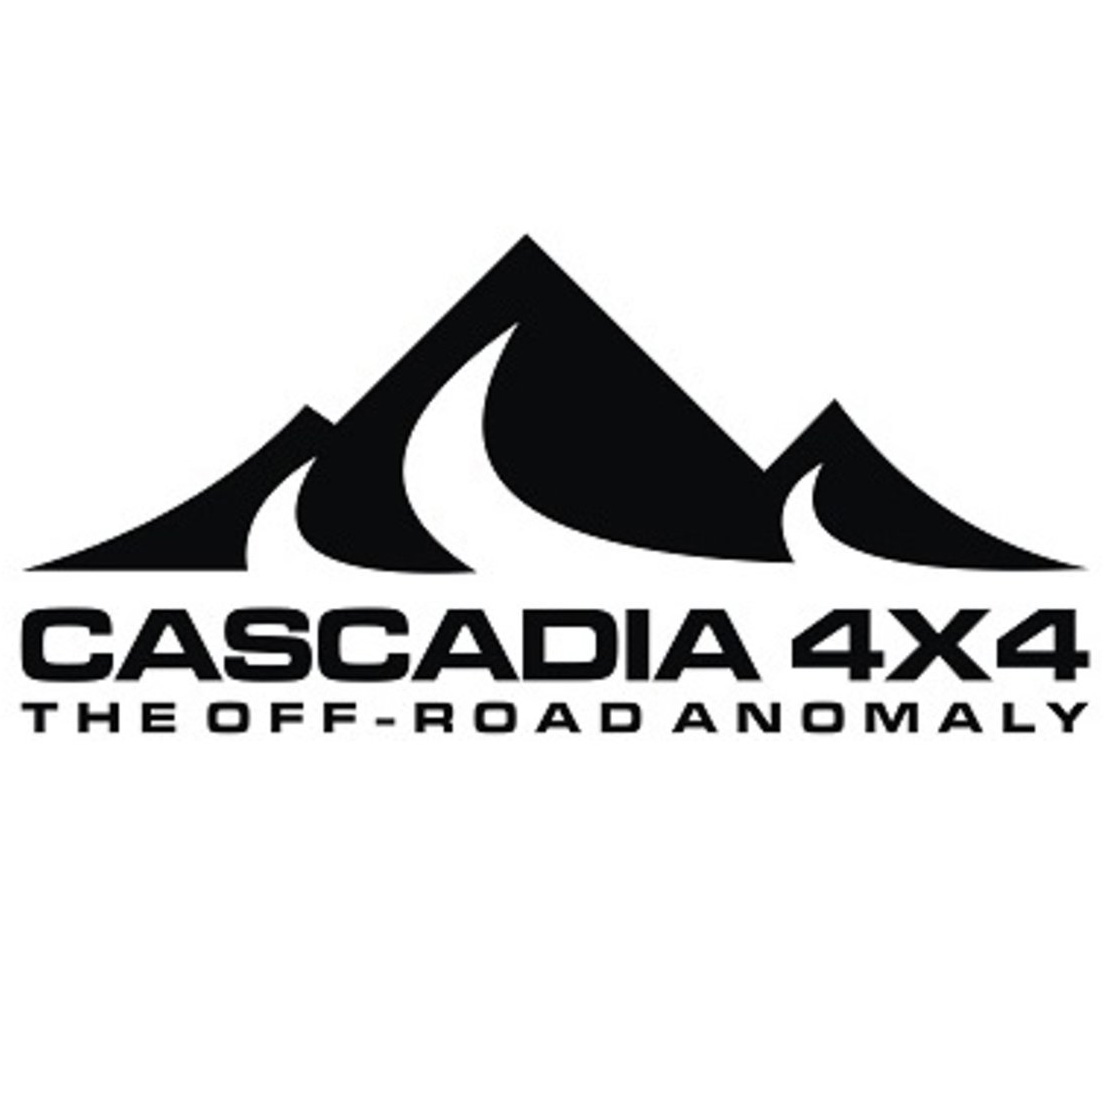 cascadia4x4 logo 1 | Overland Lady by Monique Song